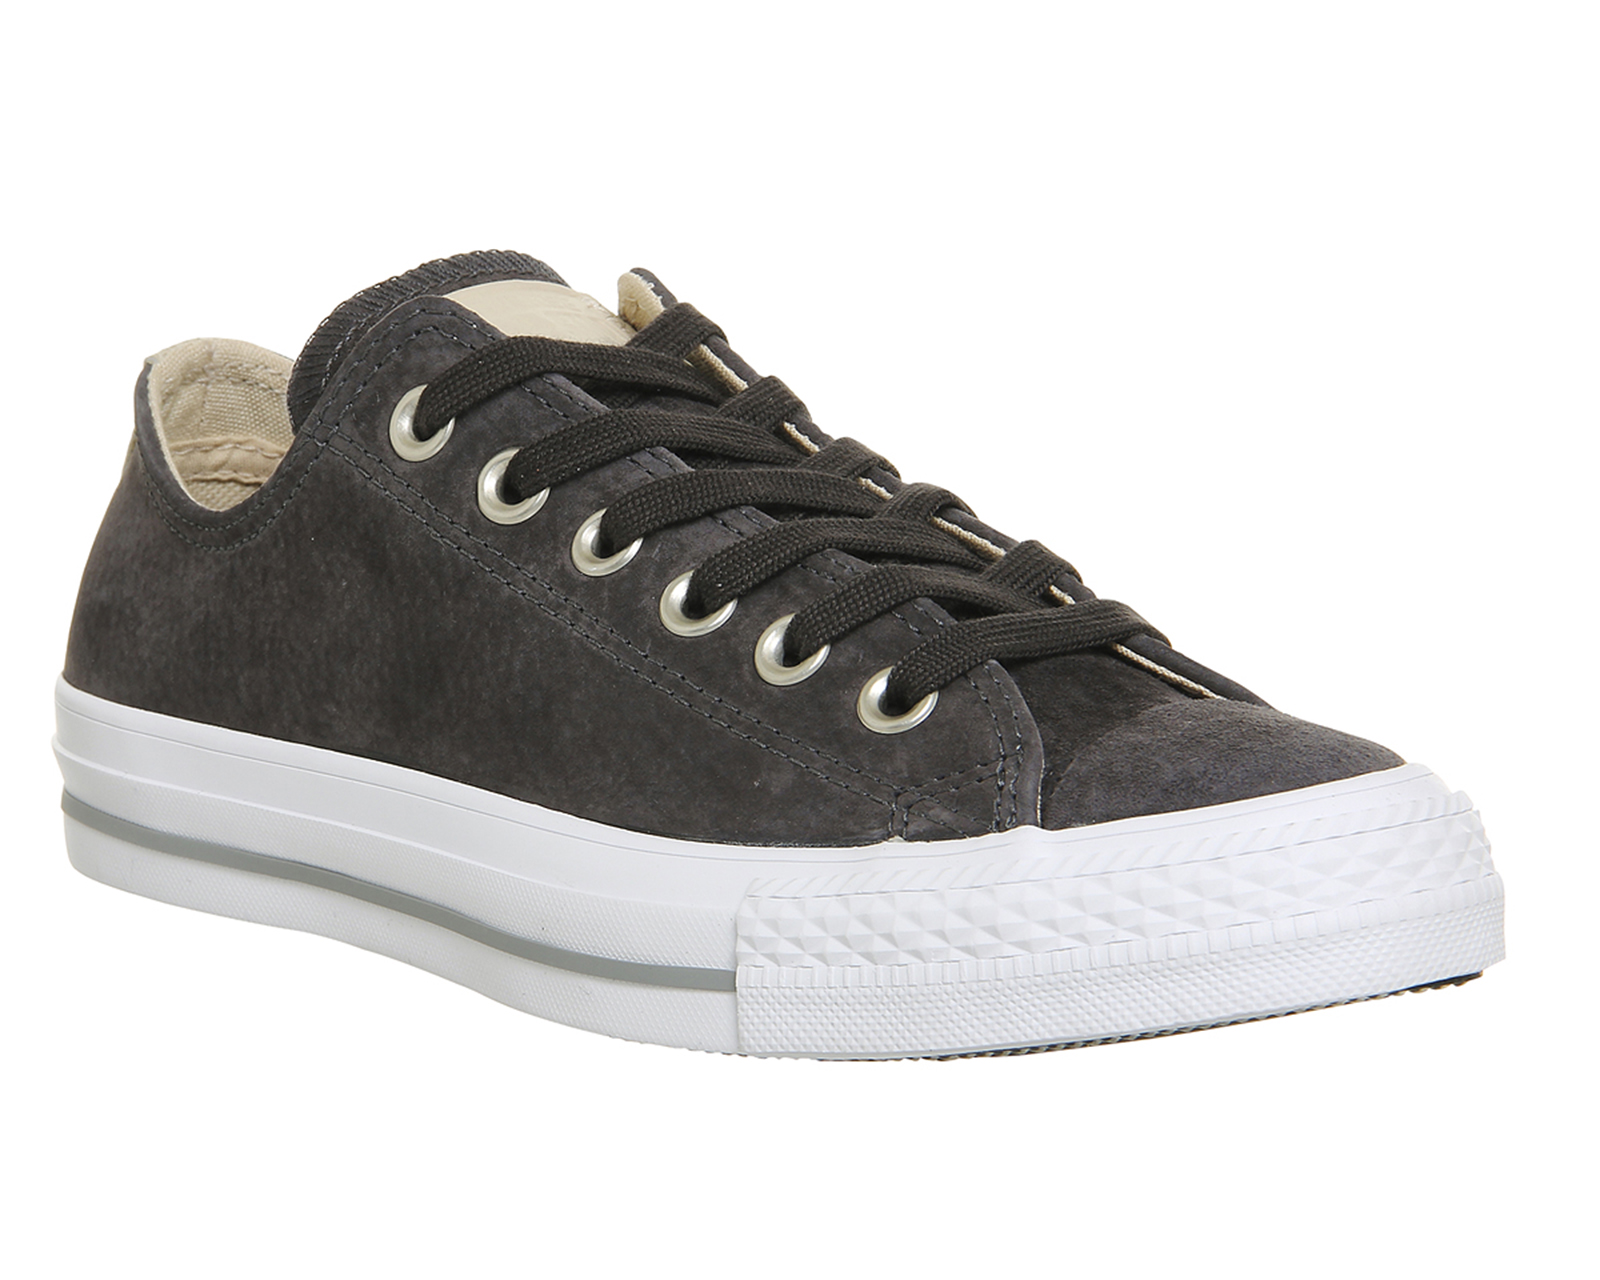 ConverseConverse All Star Low TrainersAlmost Black Ivory Suede